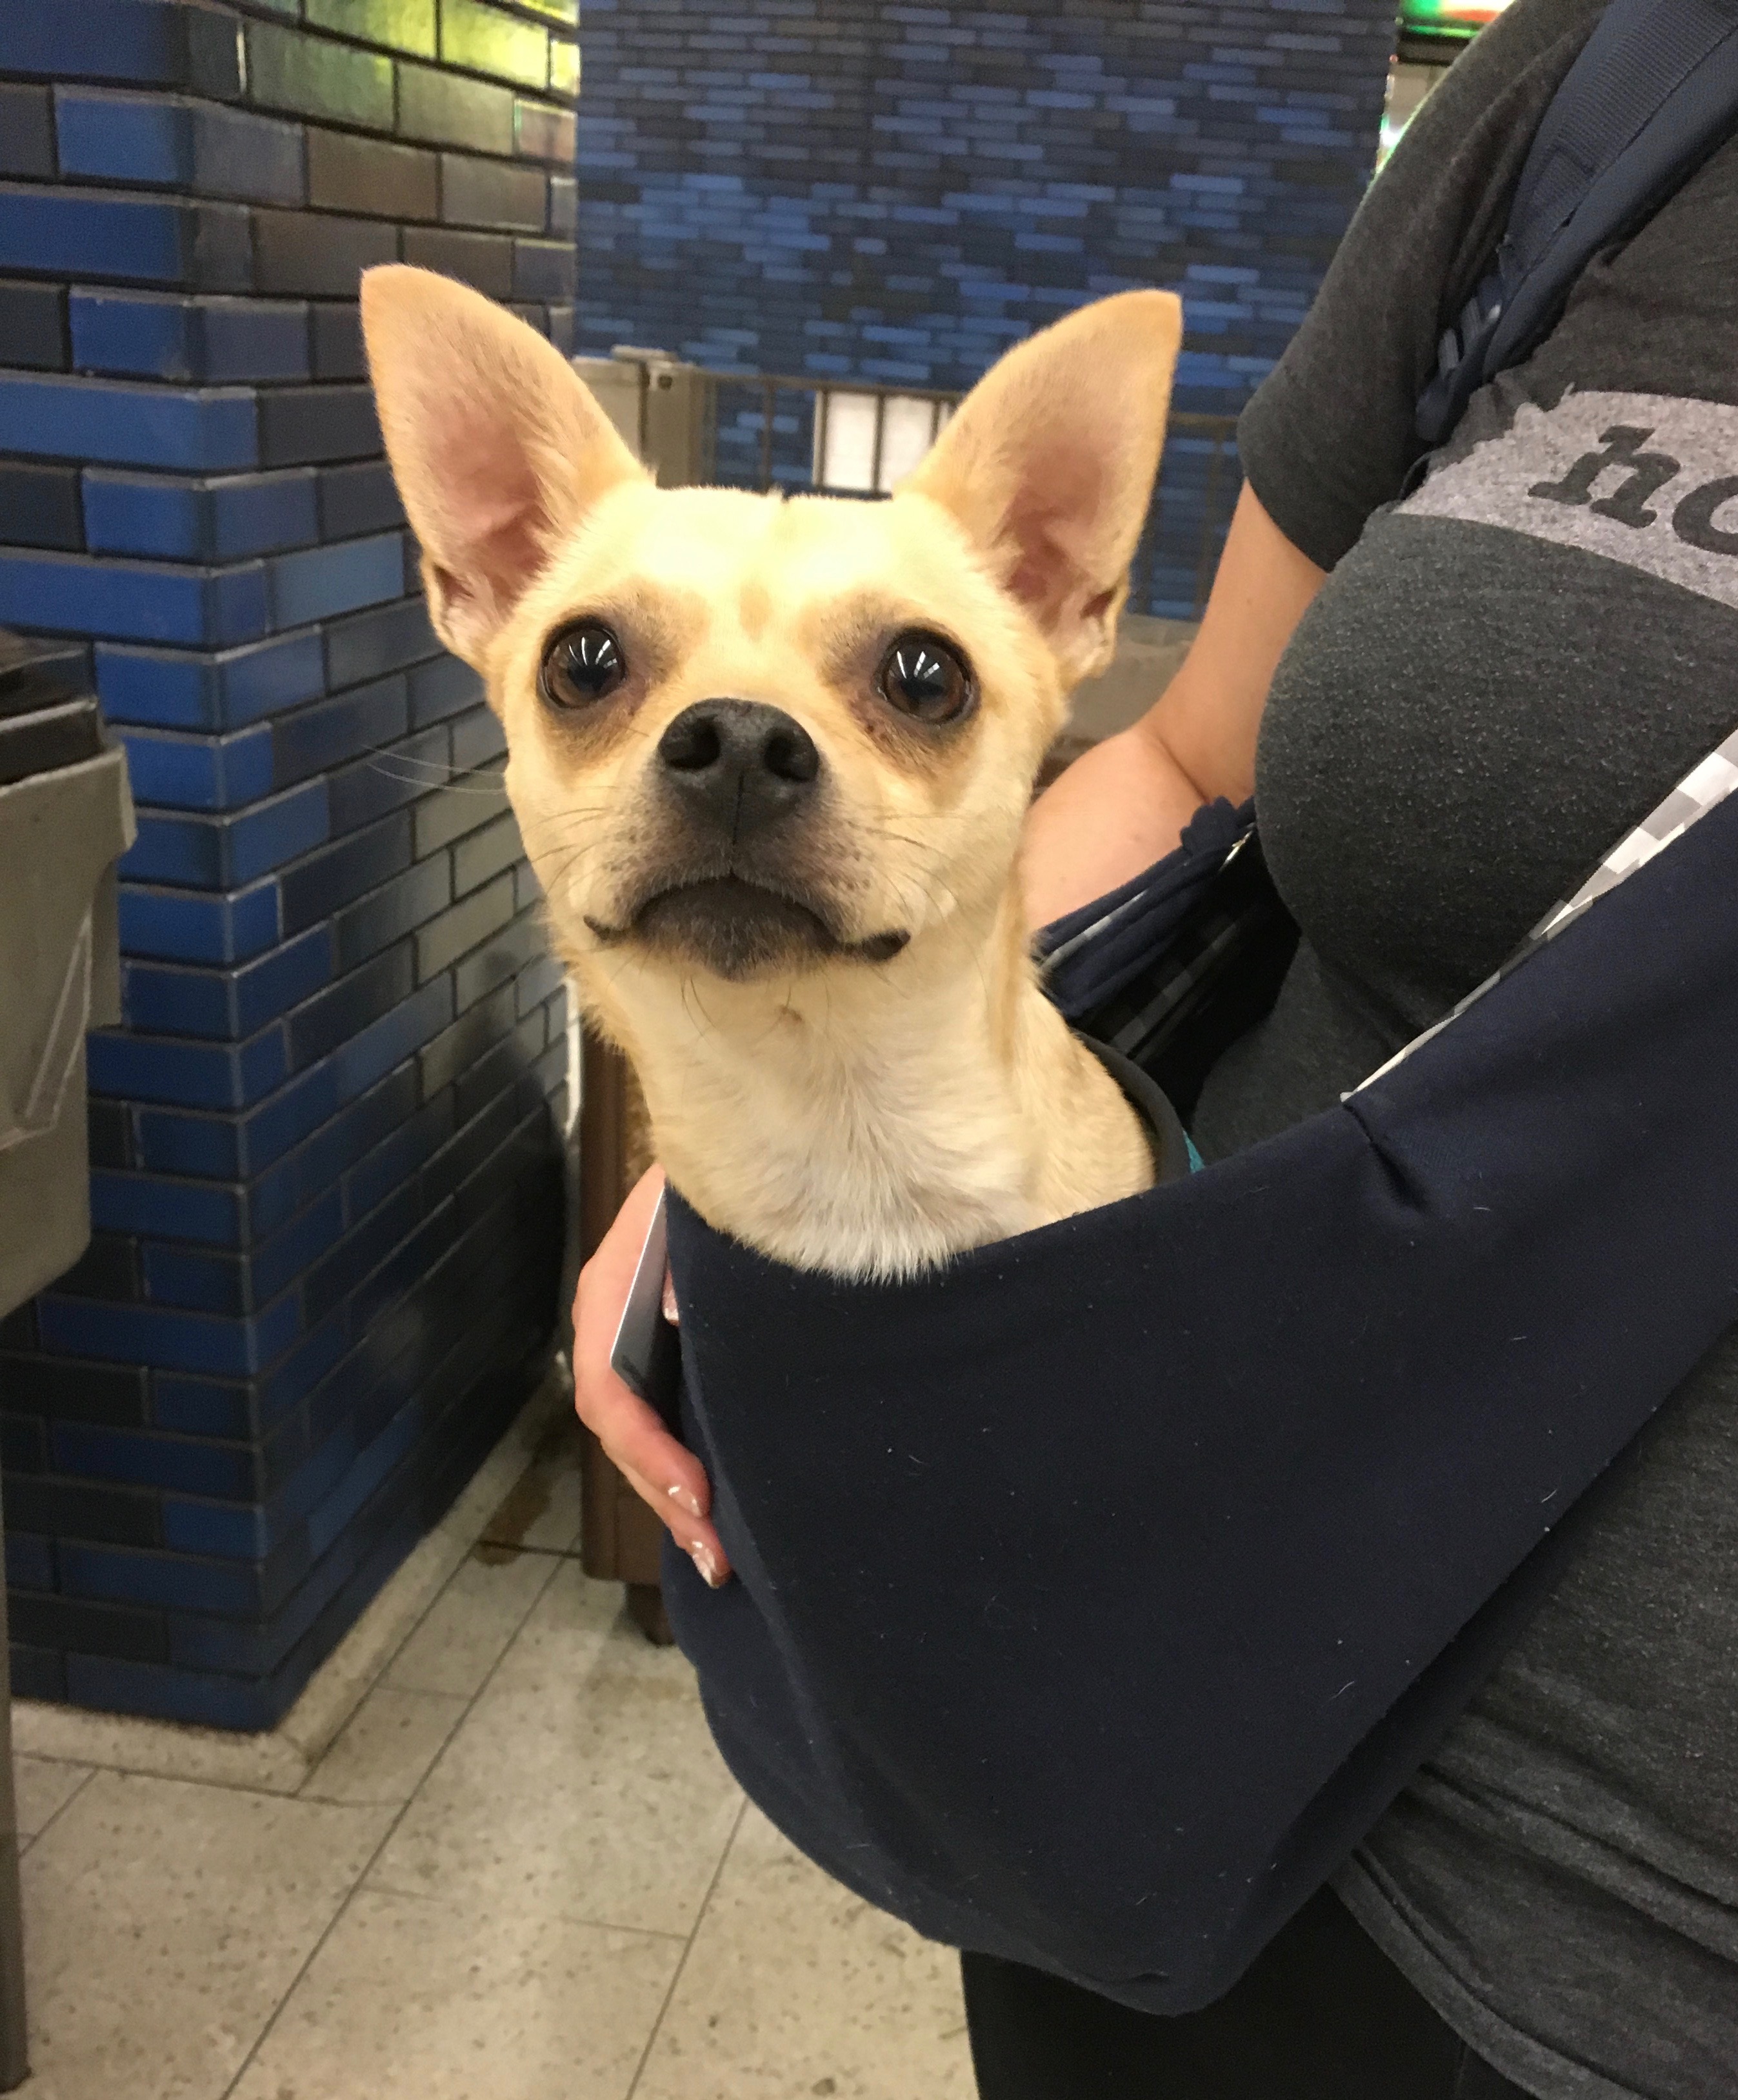 Chihuahua Mix In A Sling-Bag